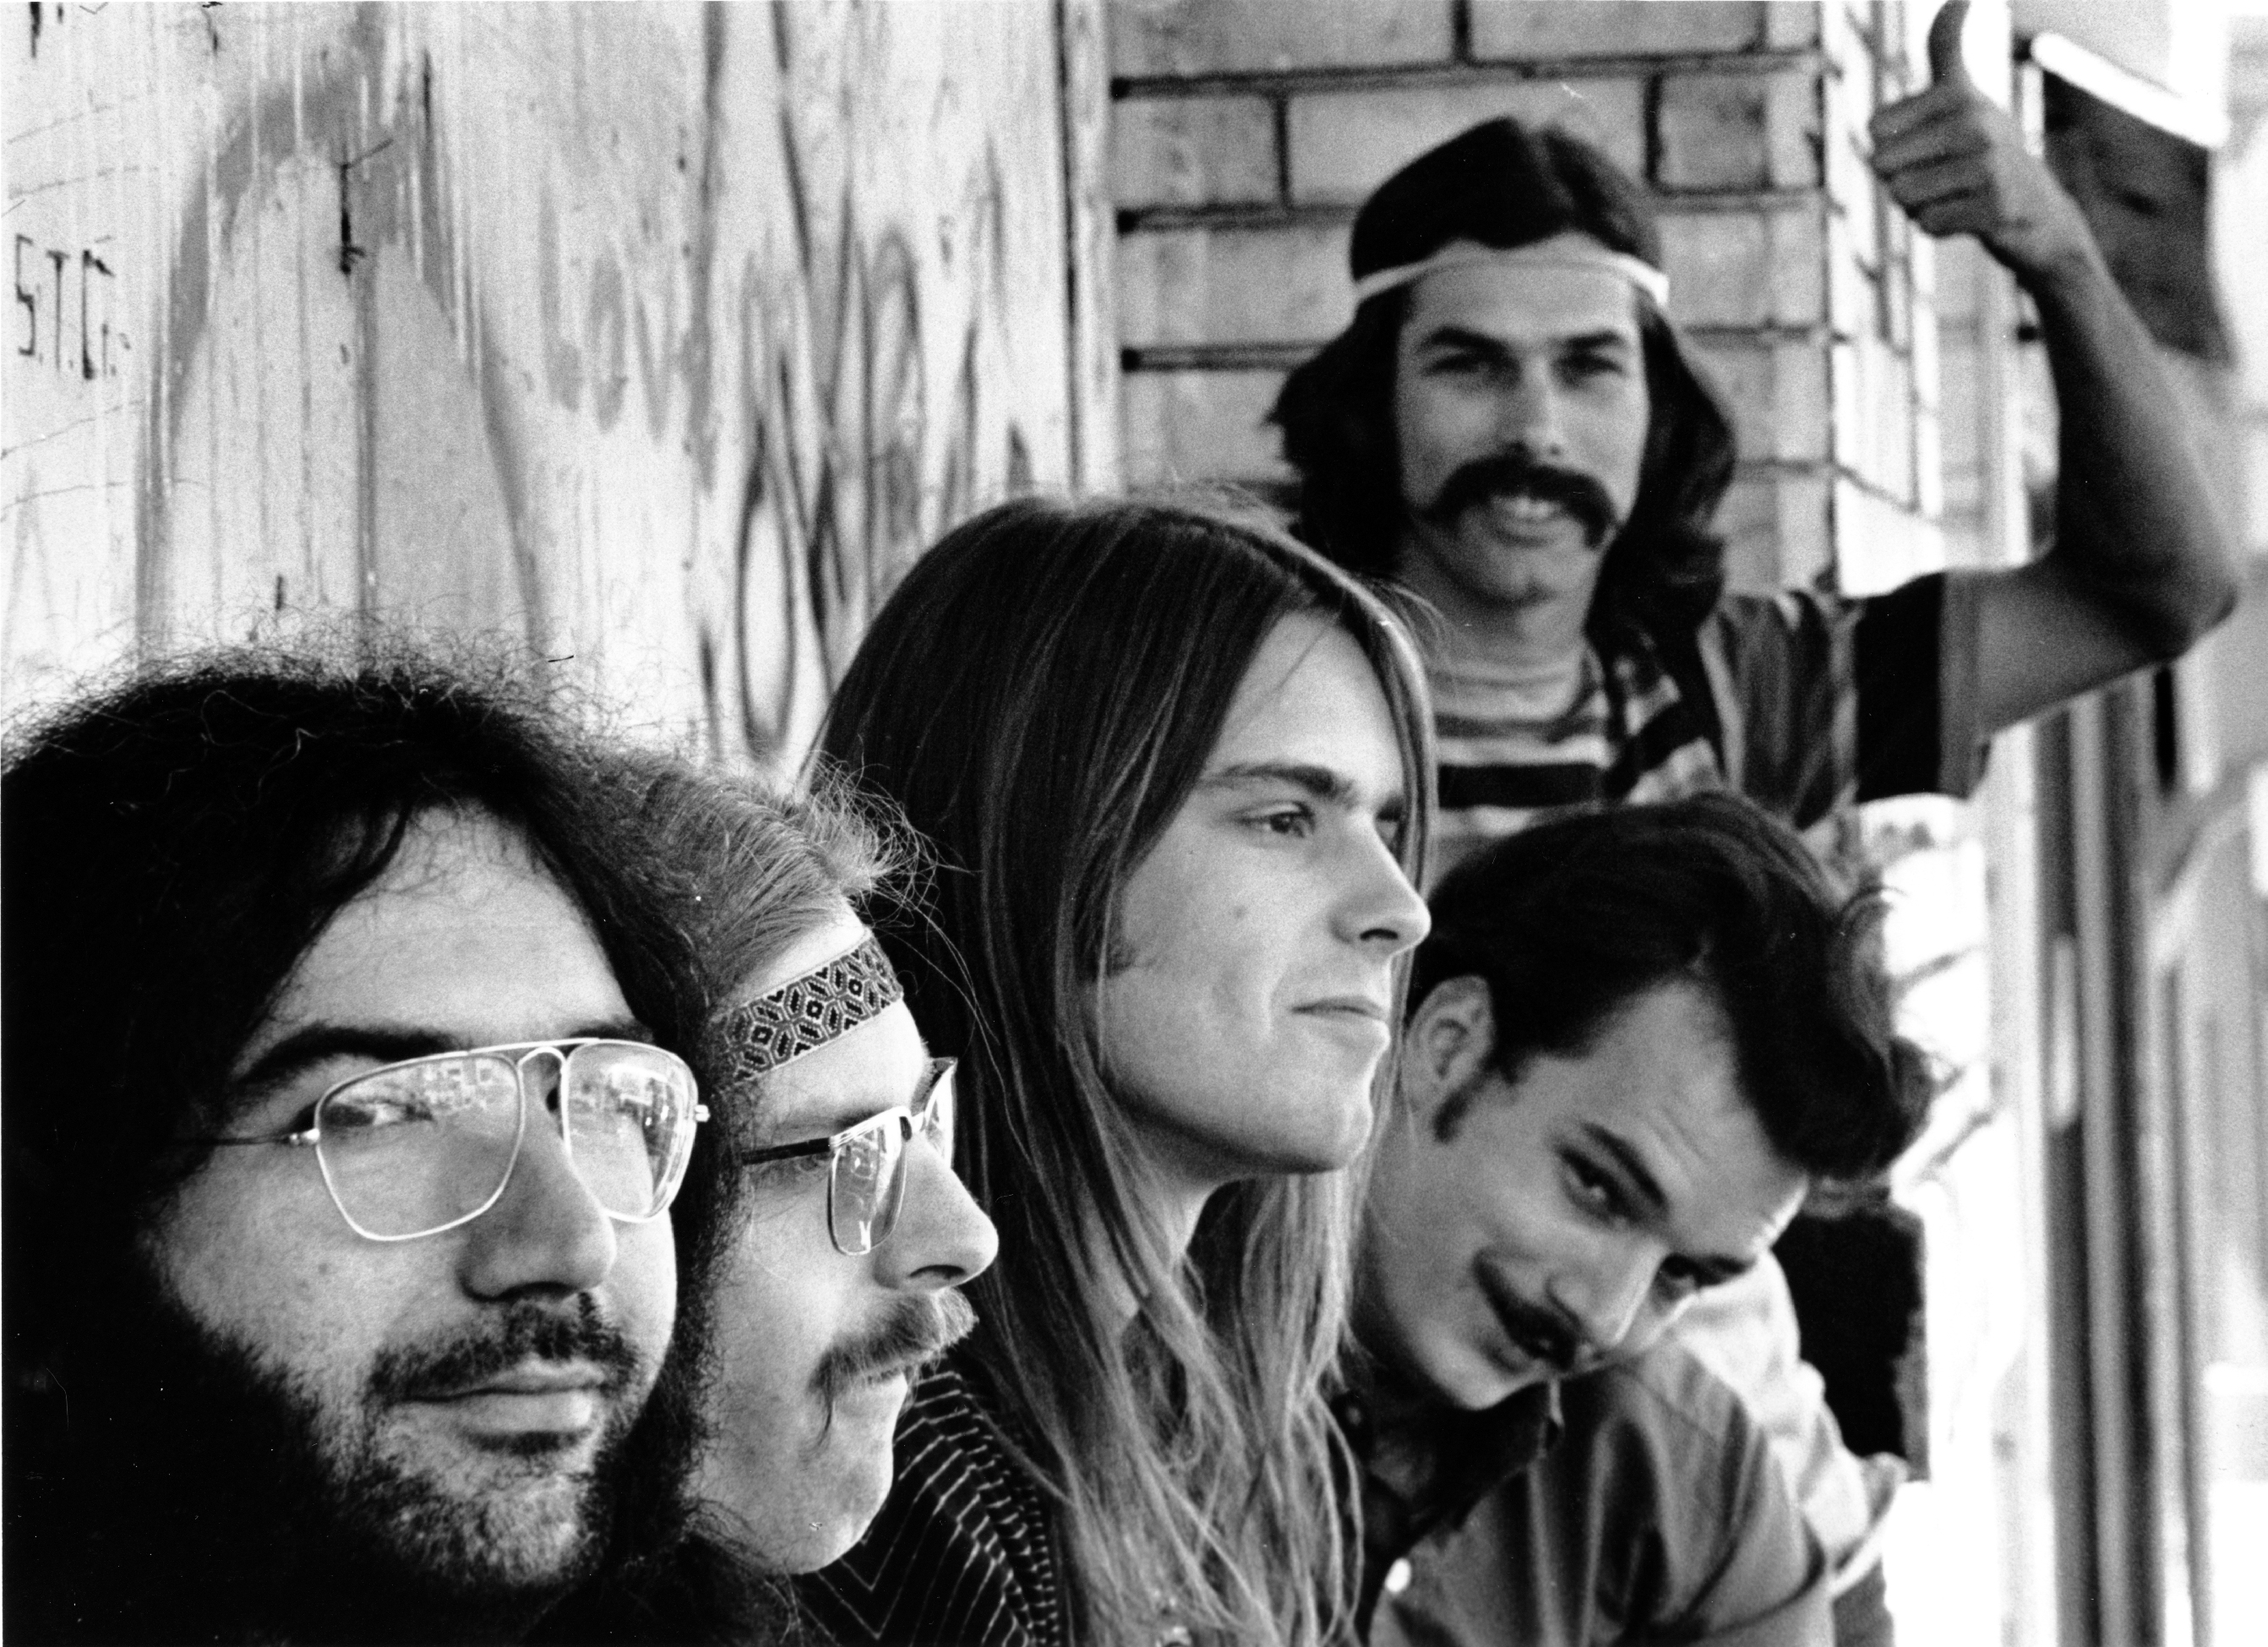 Dead & Company often perform covers of Grateful Dead tracks